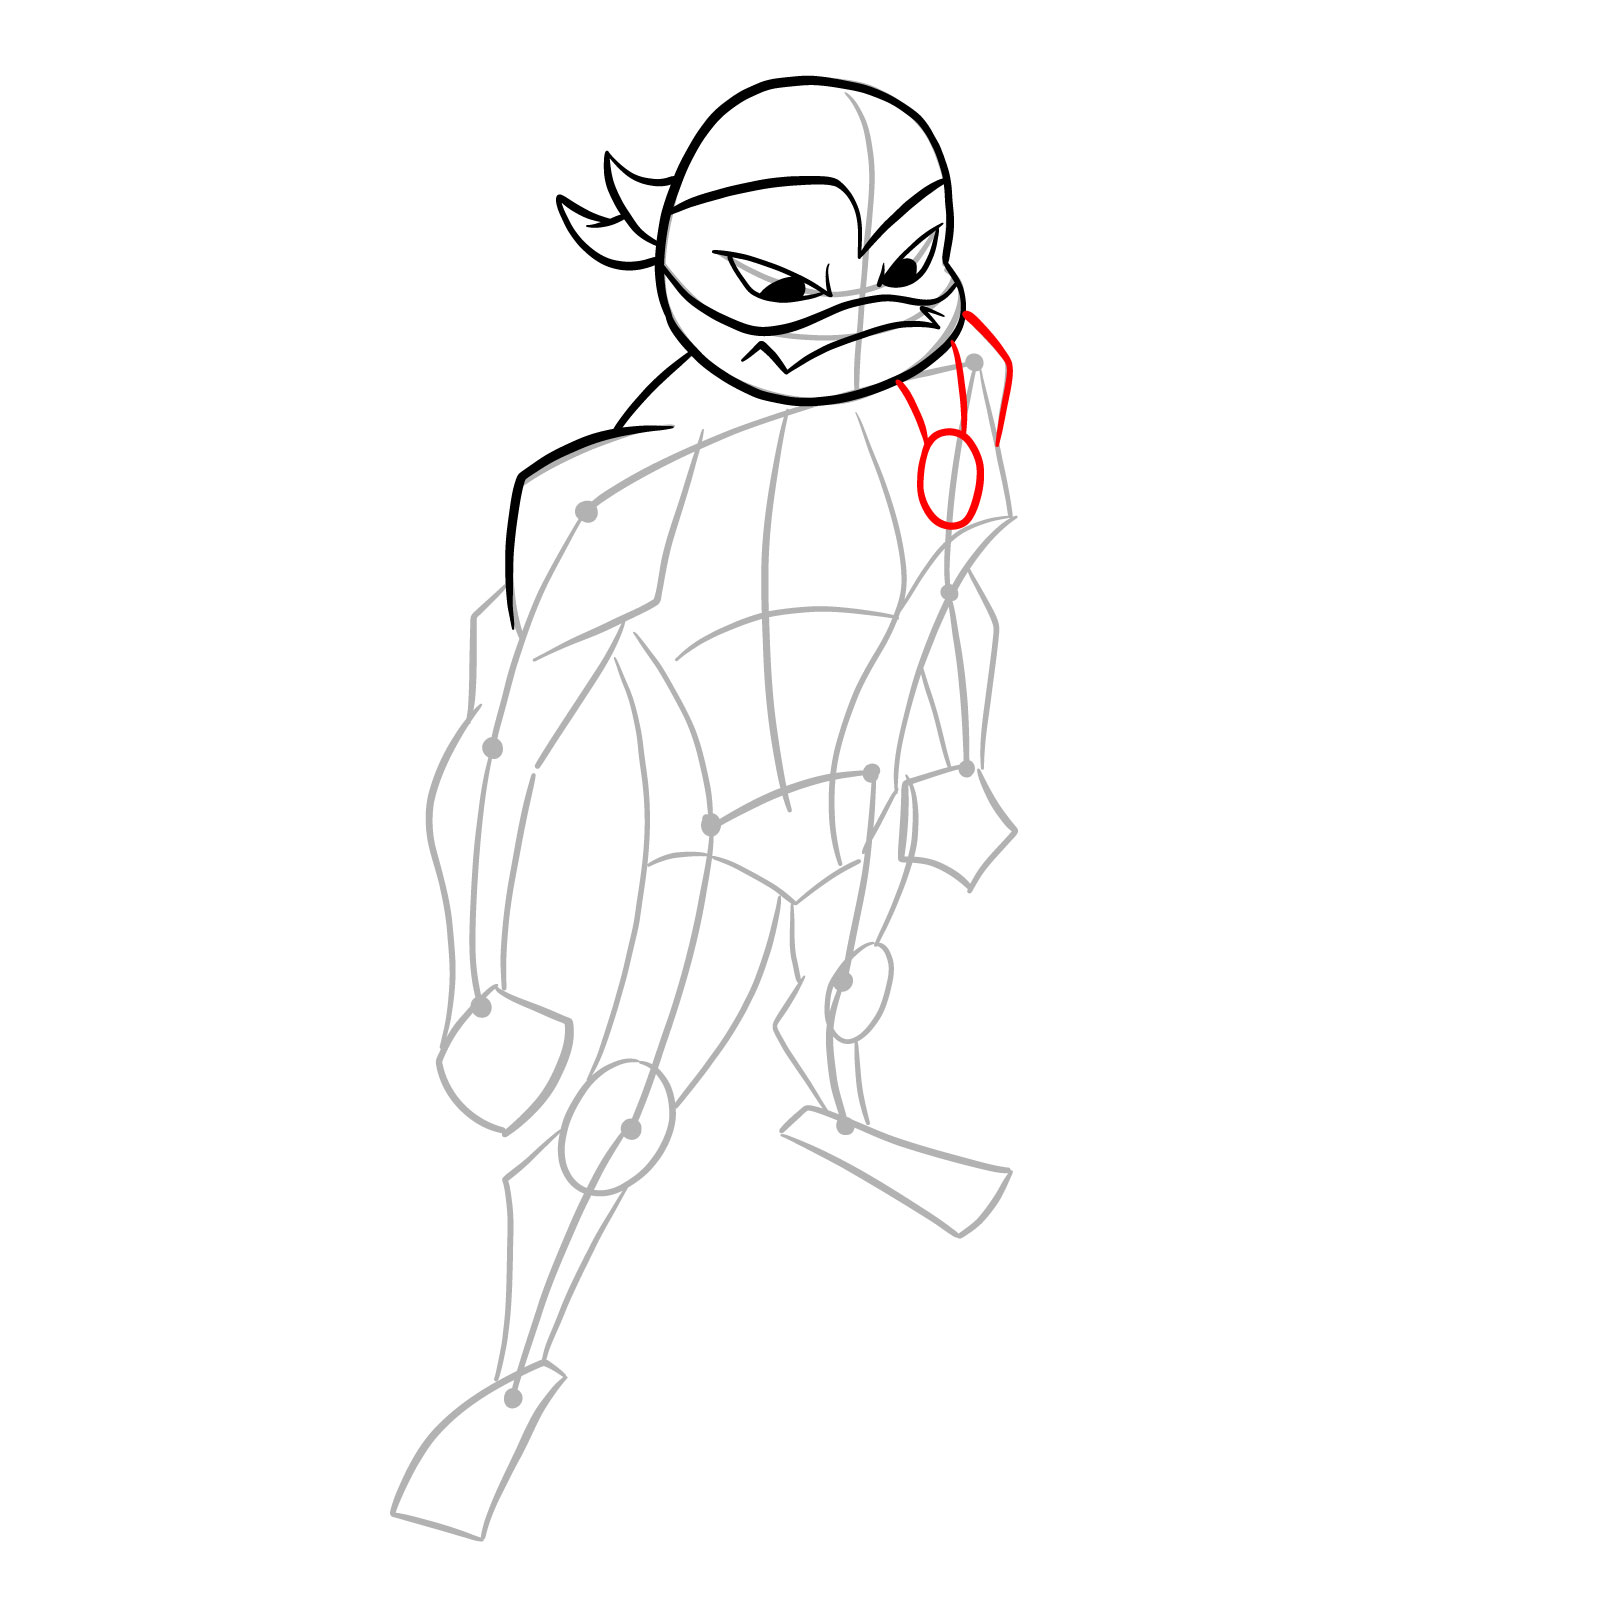 How to draw Mikey in Hamato Ninpō state - step 09